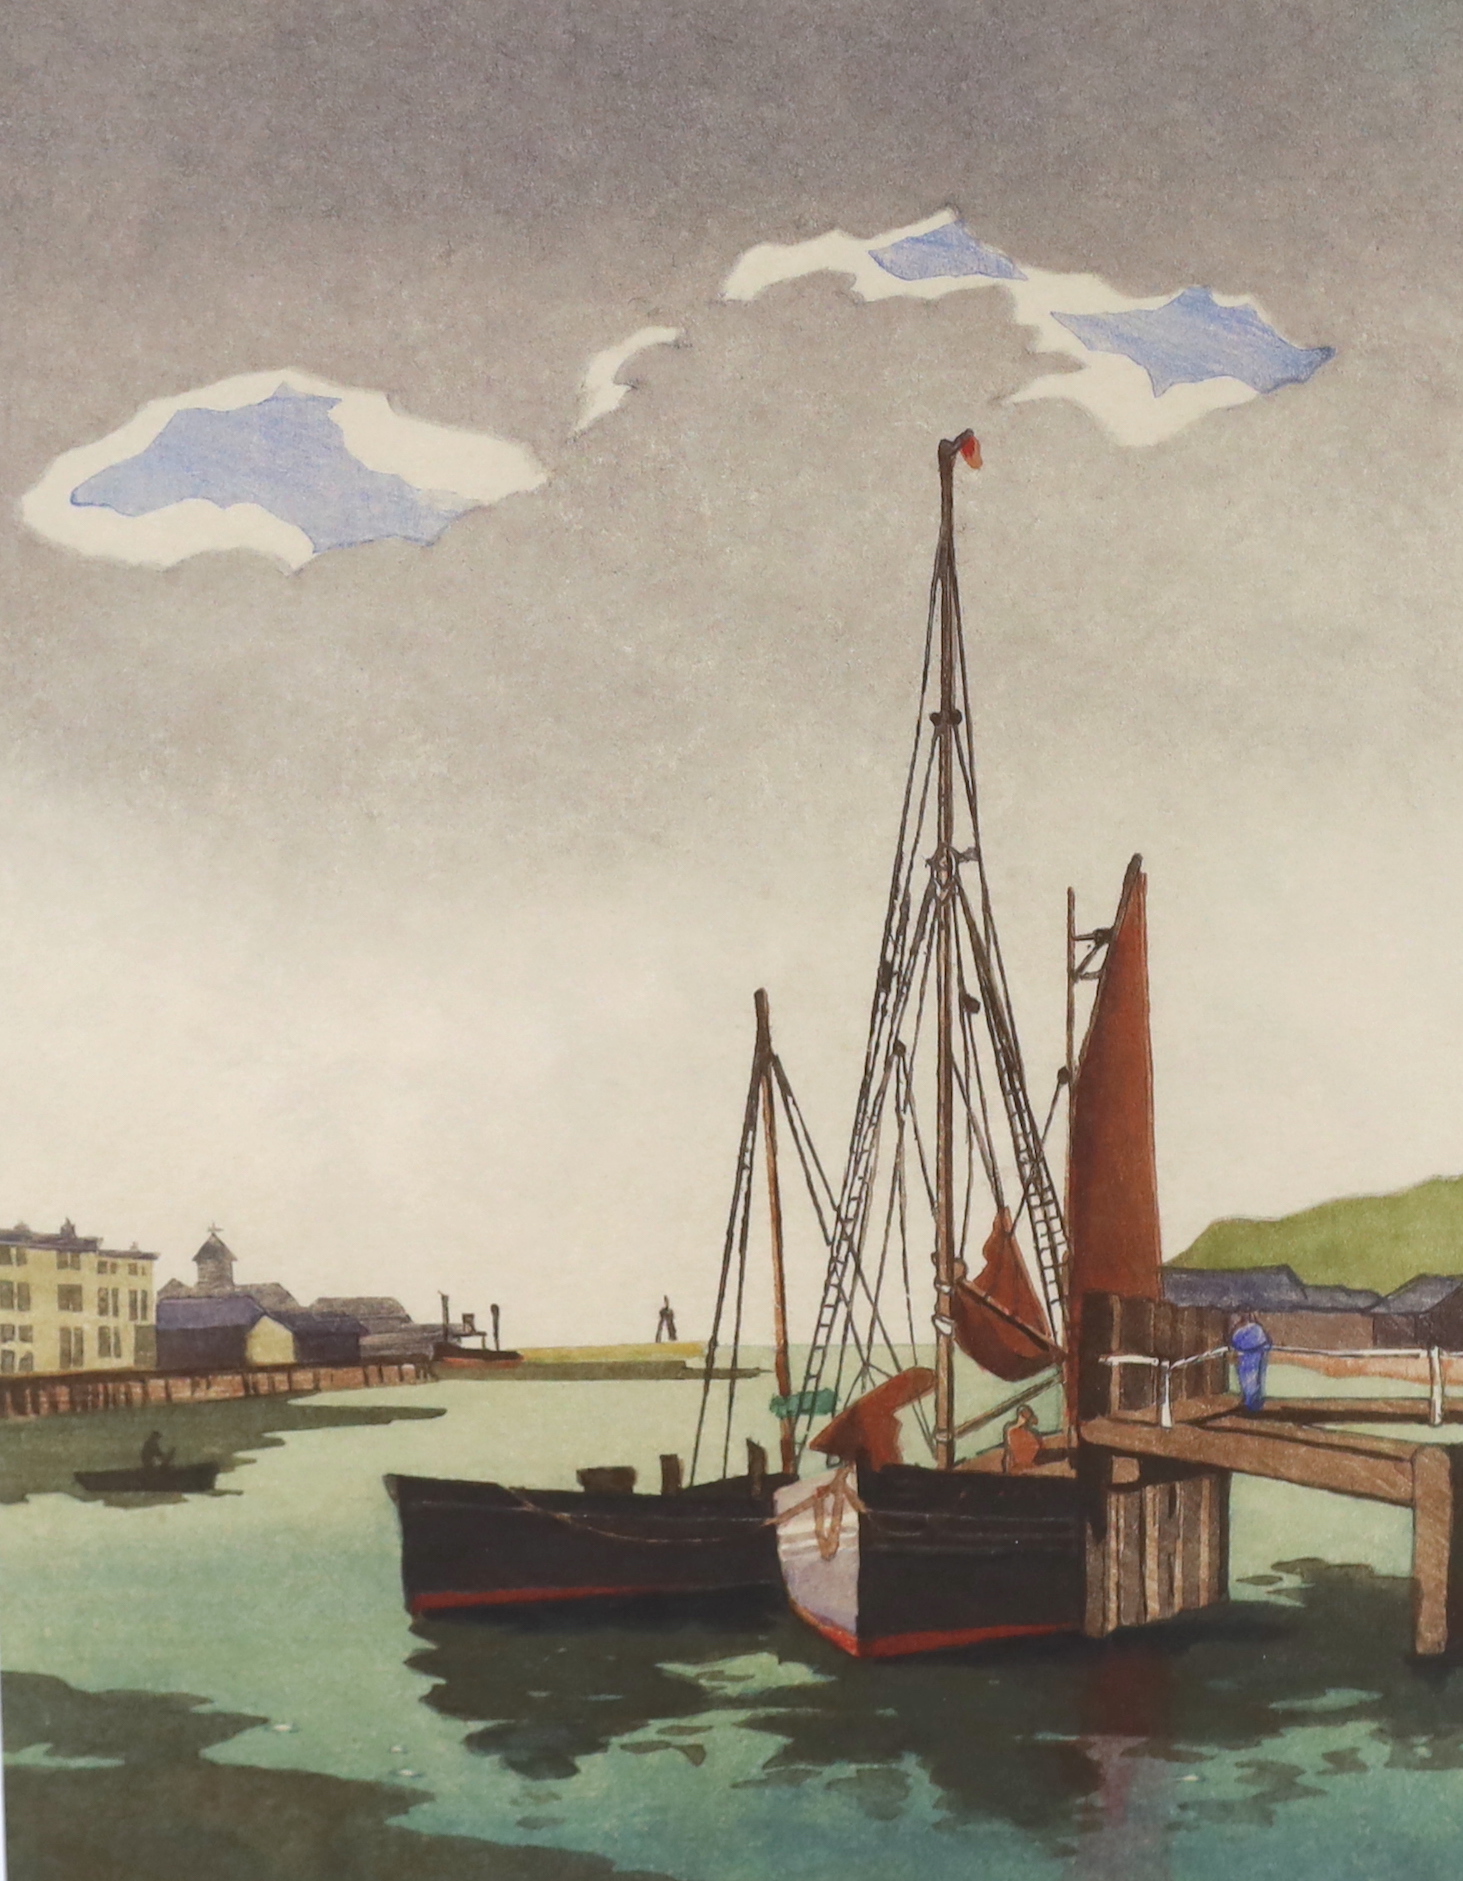 Eric Slater (British, 1896-1963), giclee print, limited edition, 33/250, Fishing boats, details and signature verso, 26 x 20cm